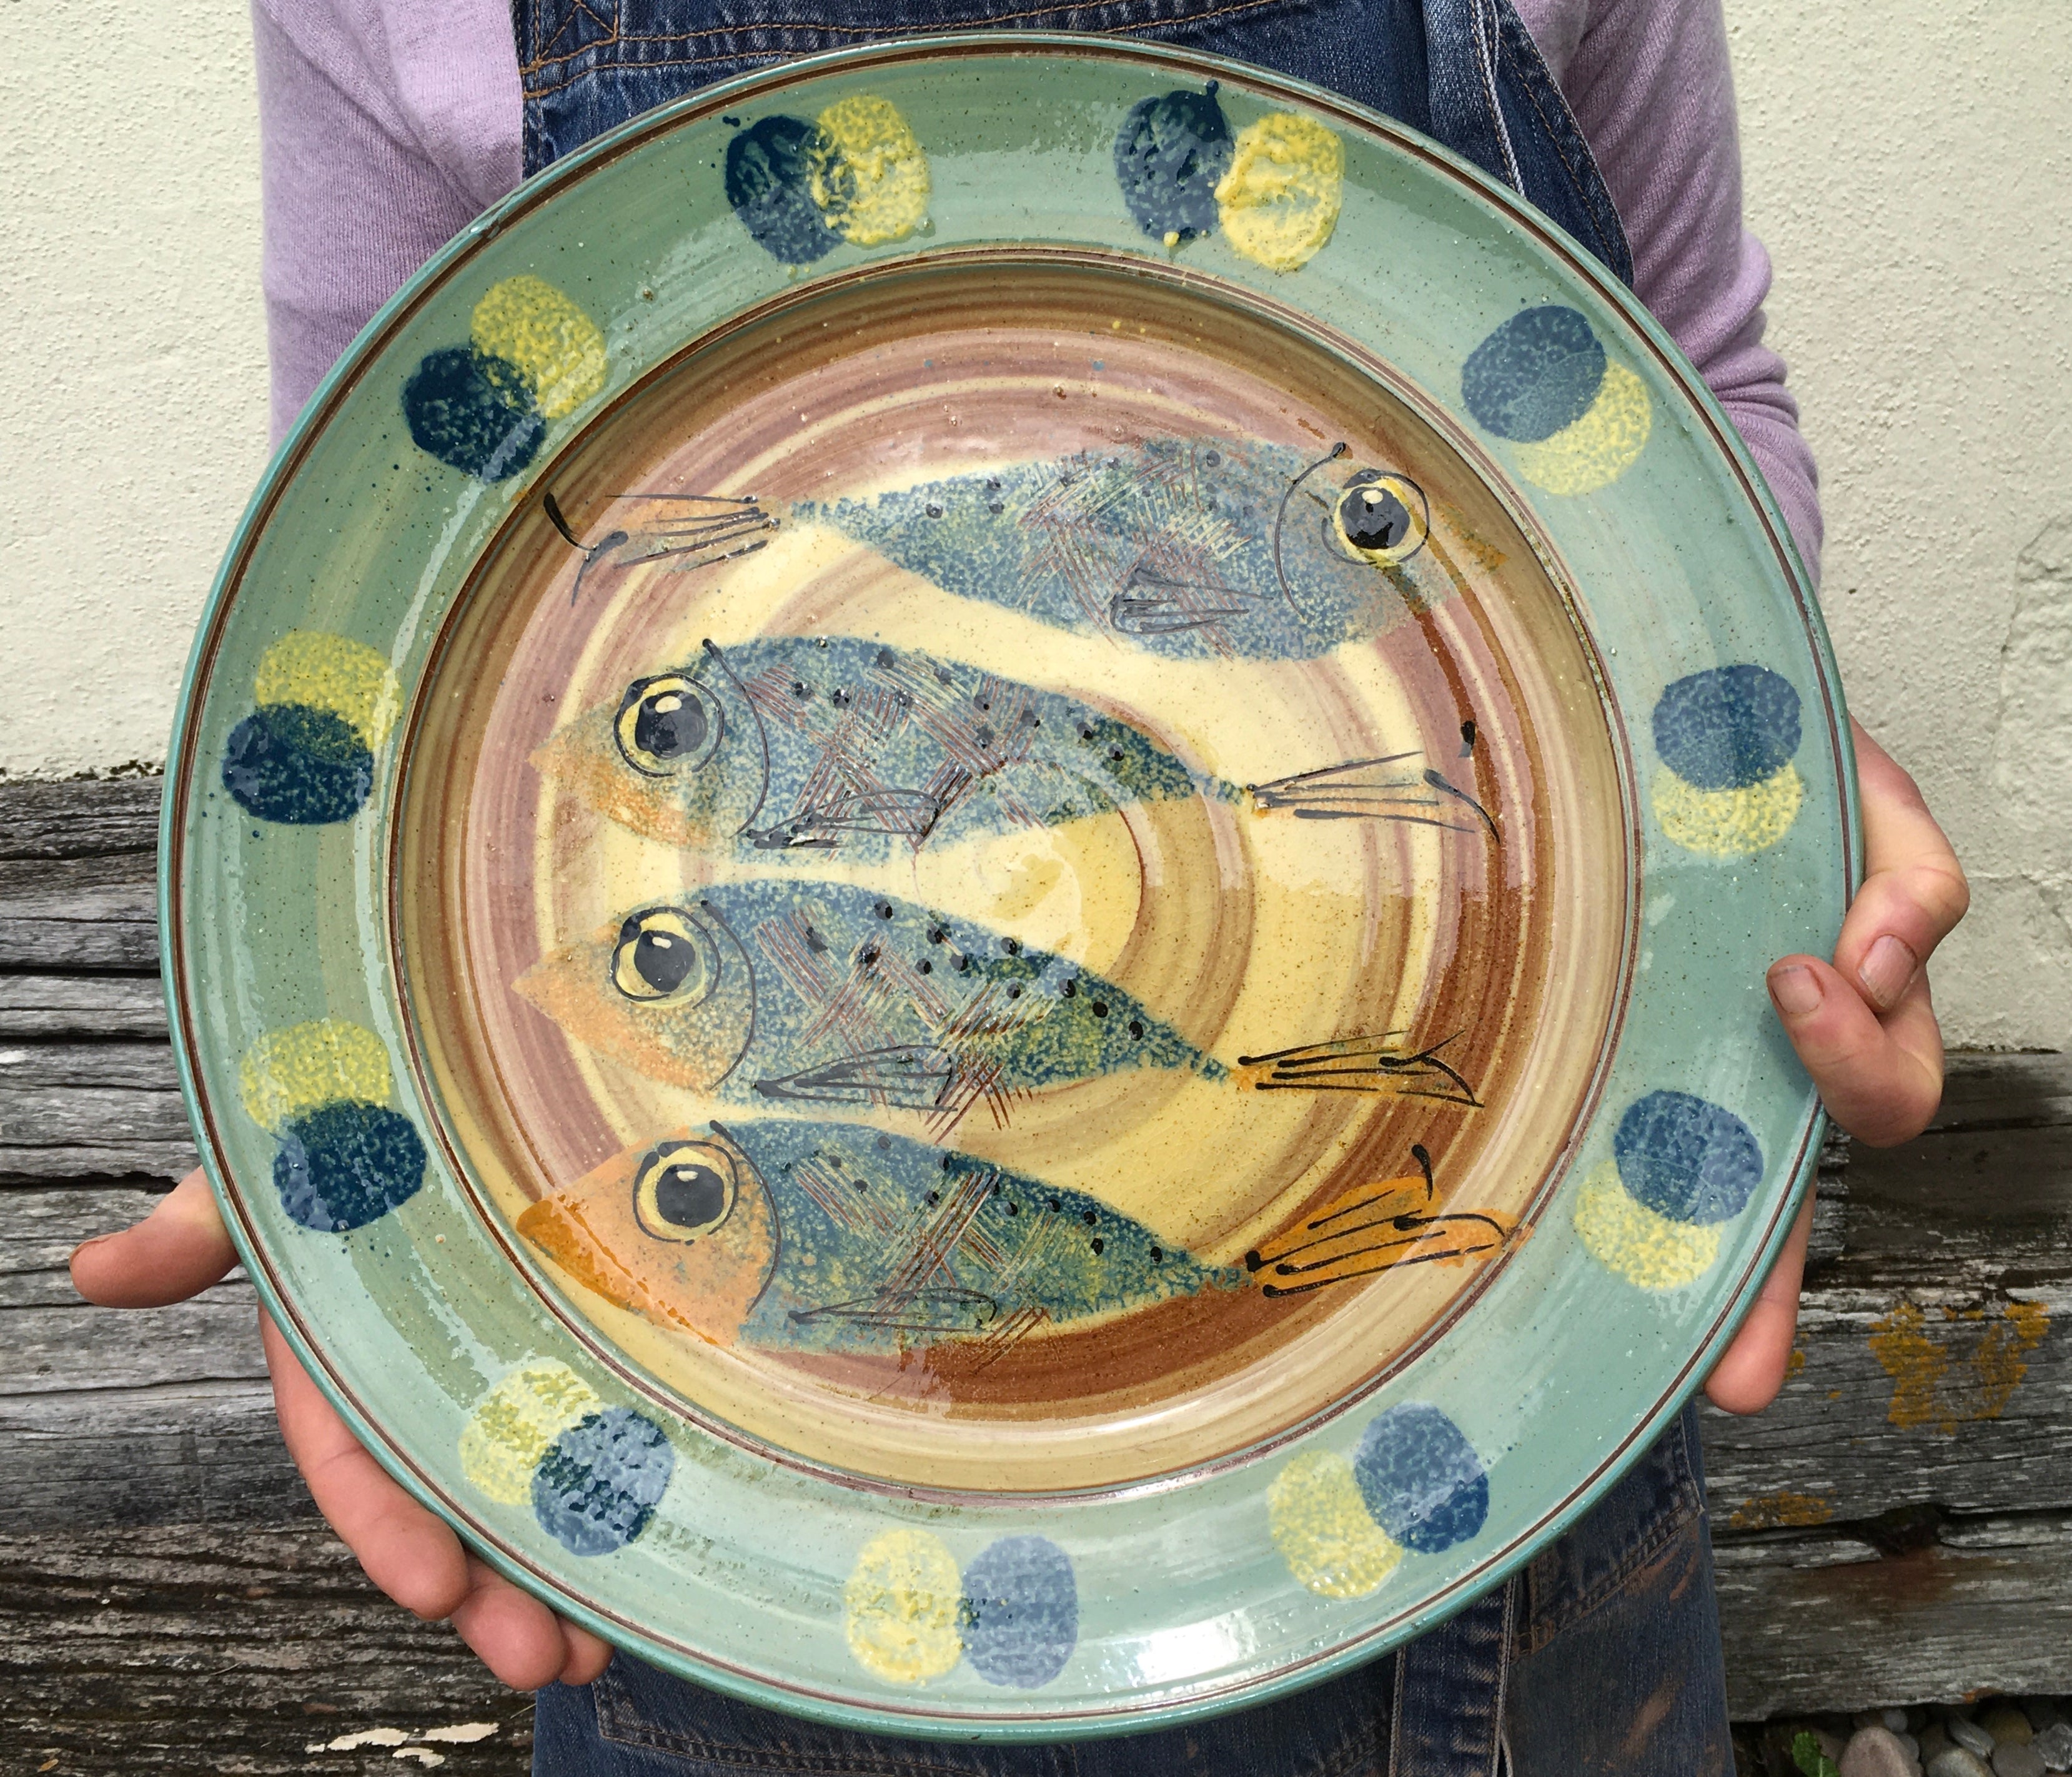 Large Platter with Fish and Bubbles